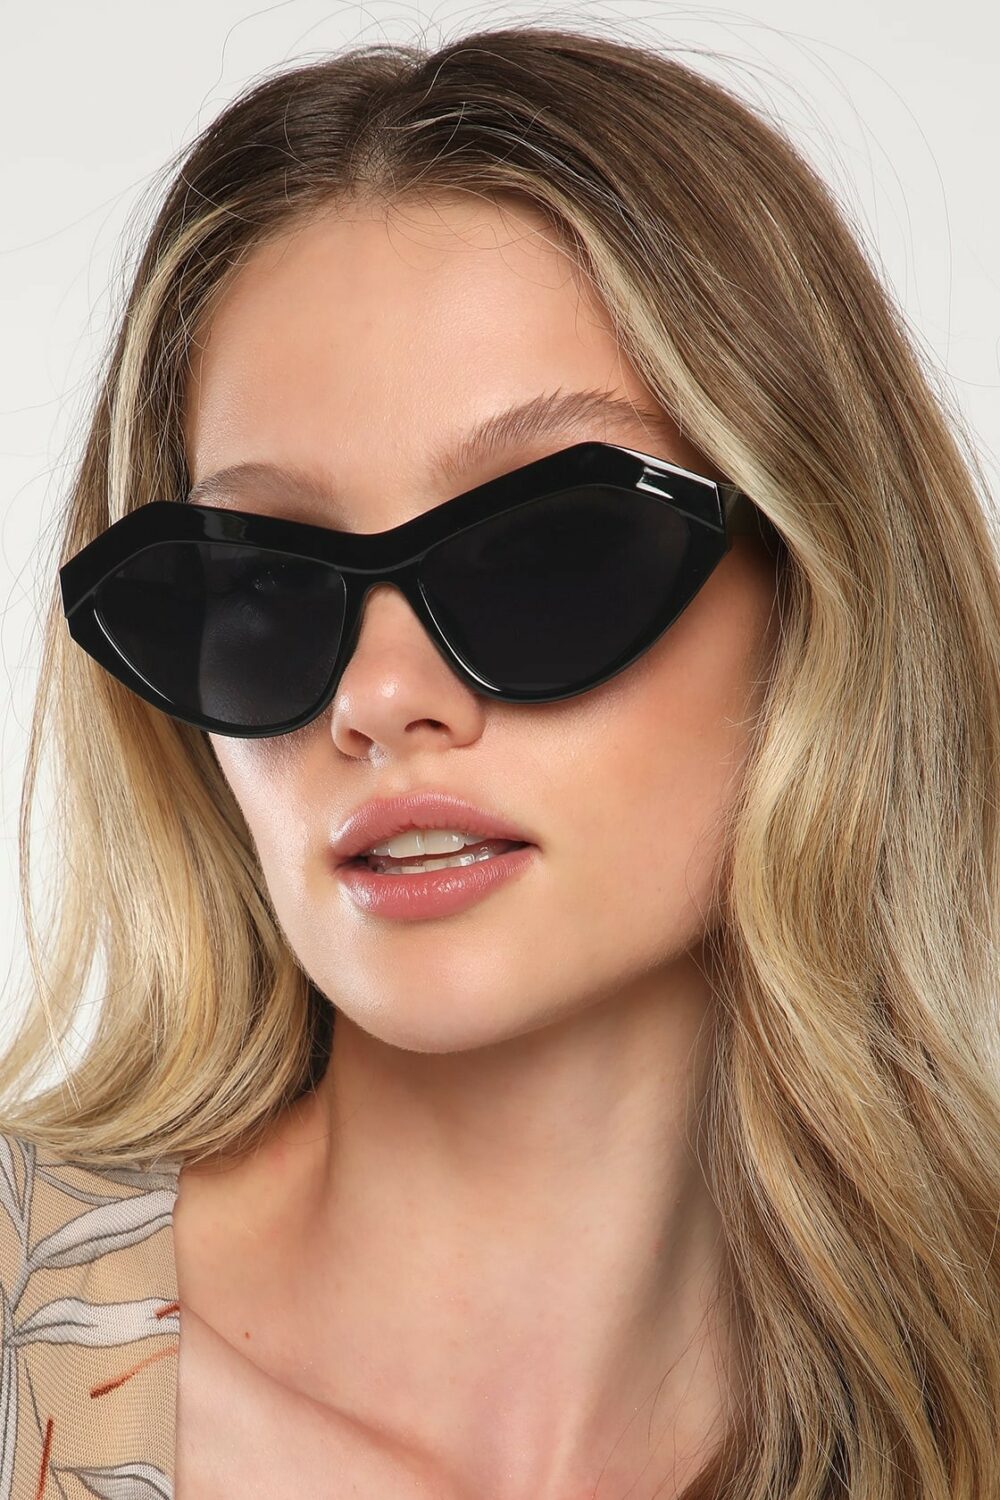 Cat eye sunglasses are a fashion necessity for woman who wants to look her best. These trendy sunglasses include black lenses with black frame